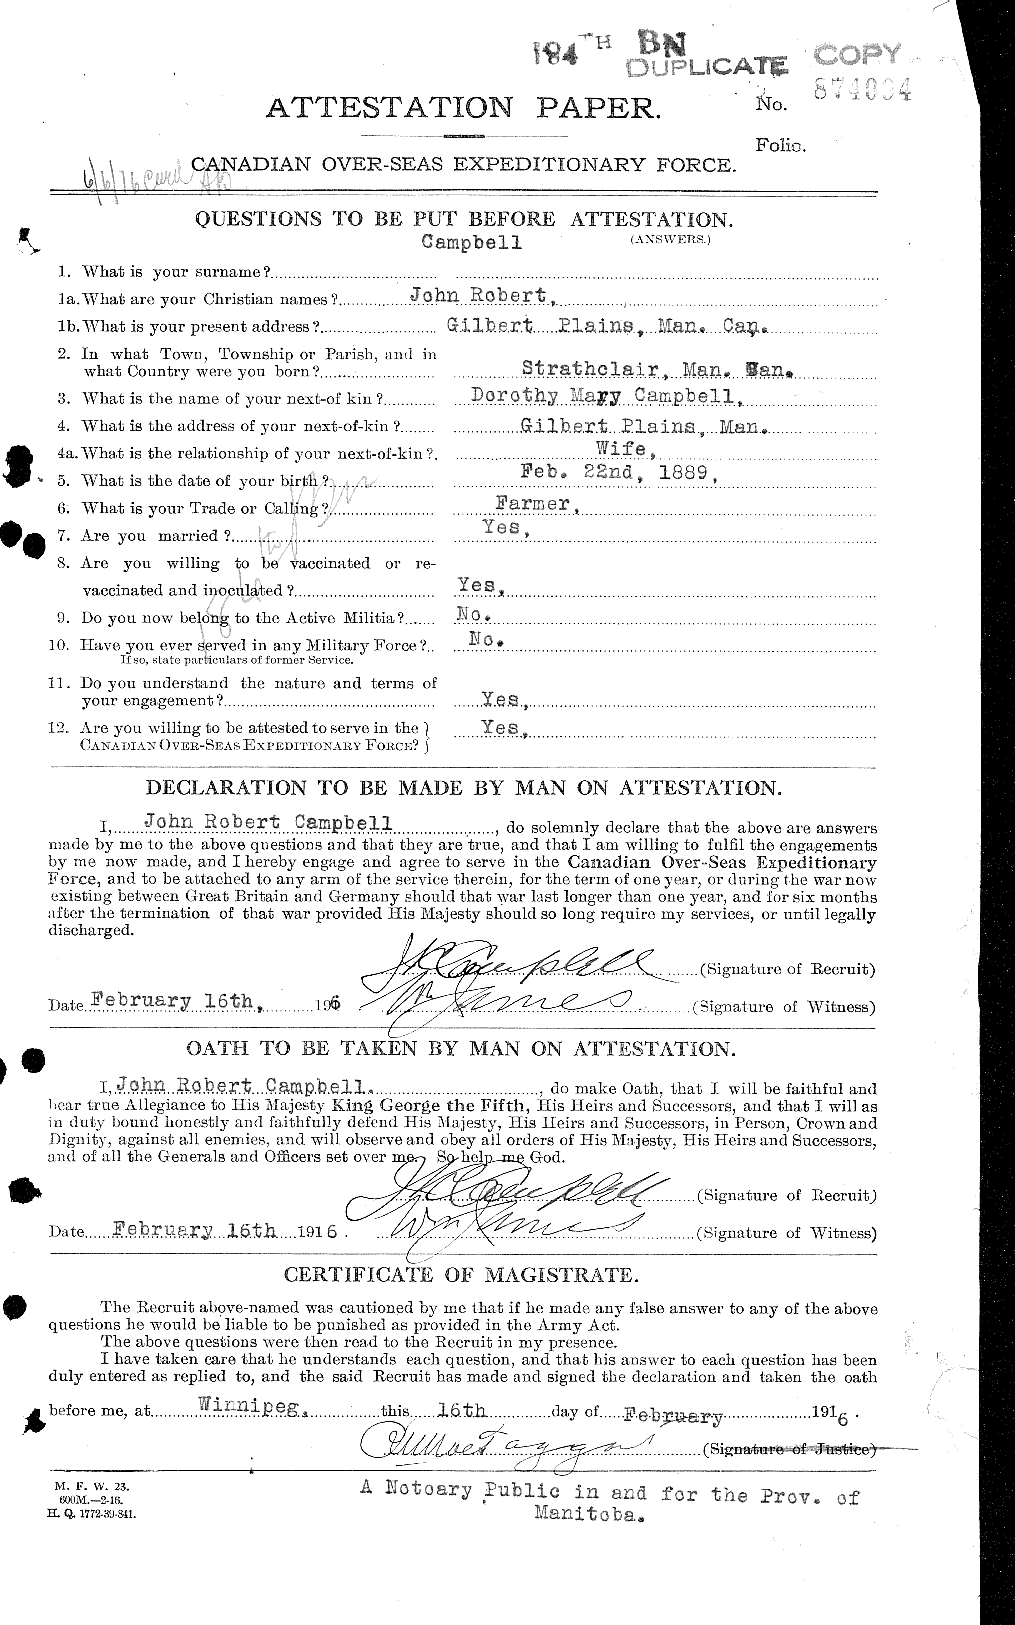 Personnel Records of the First World War - CEF 003779a